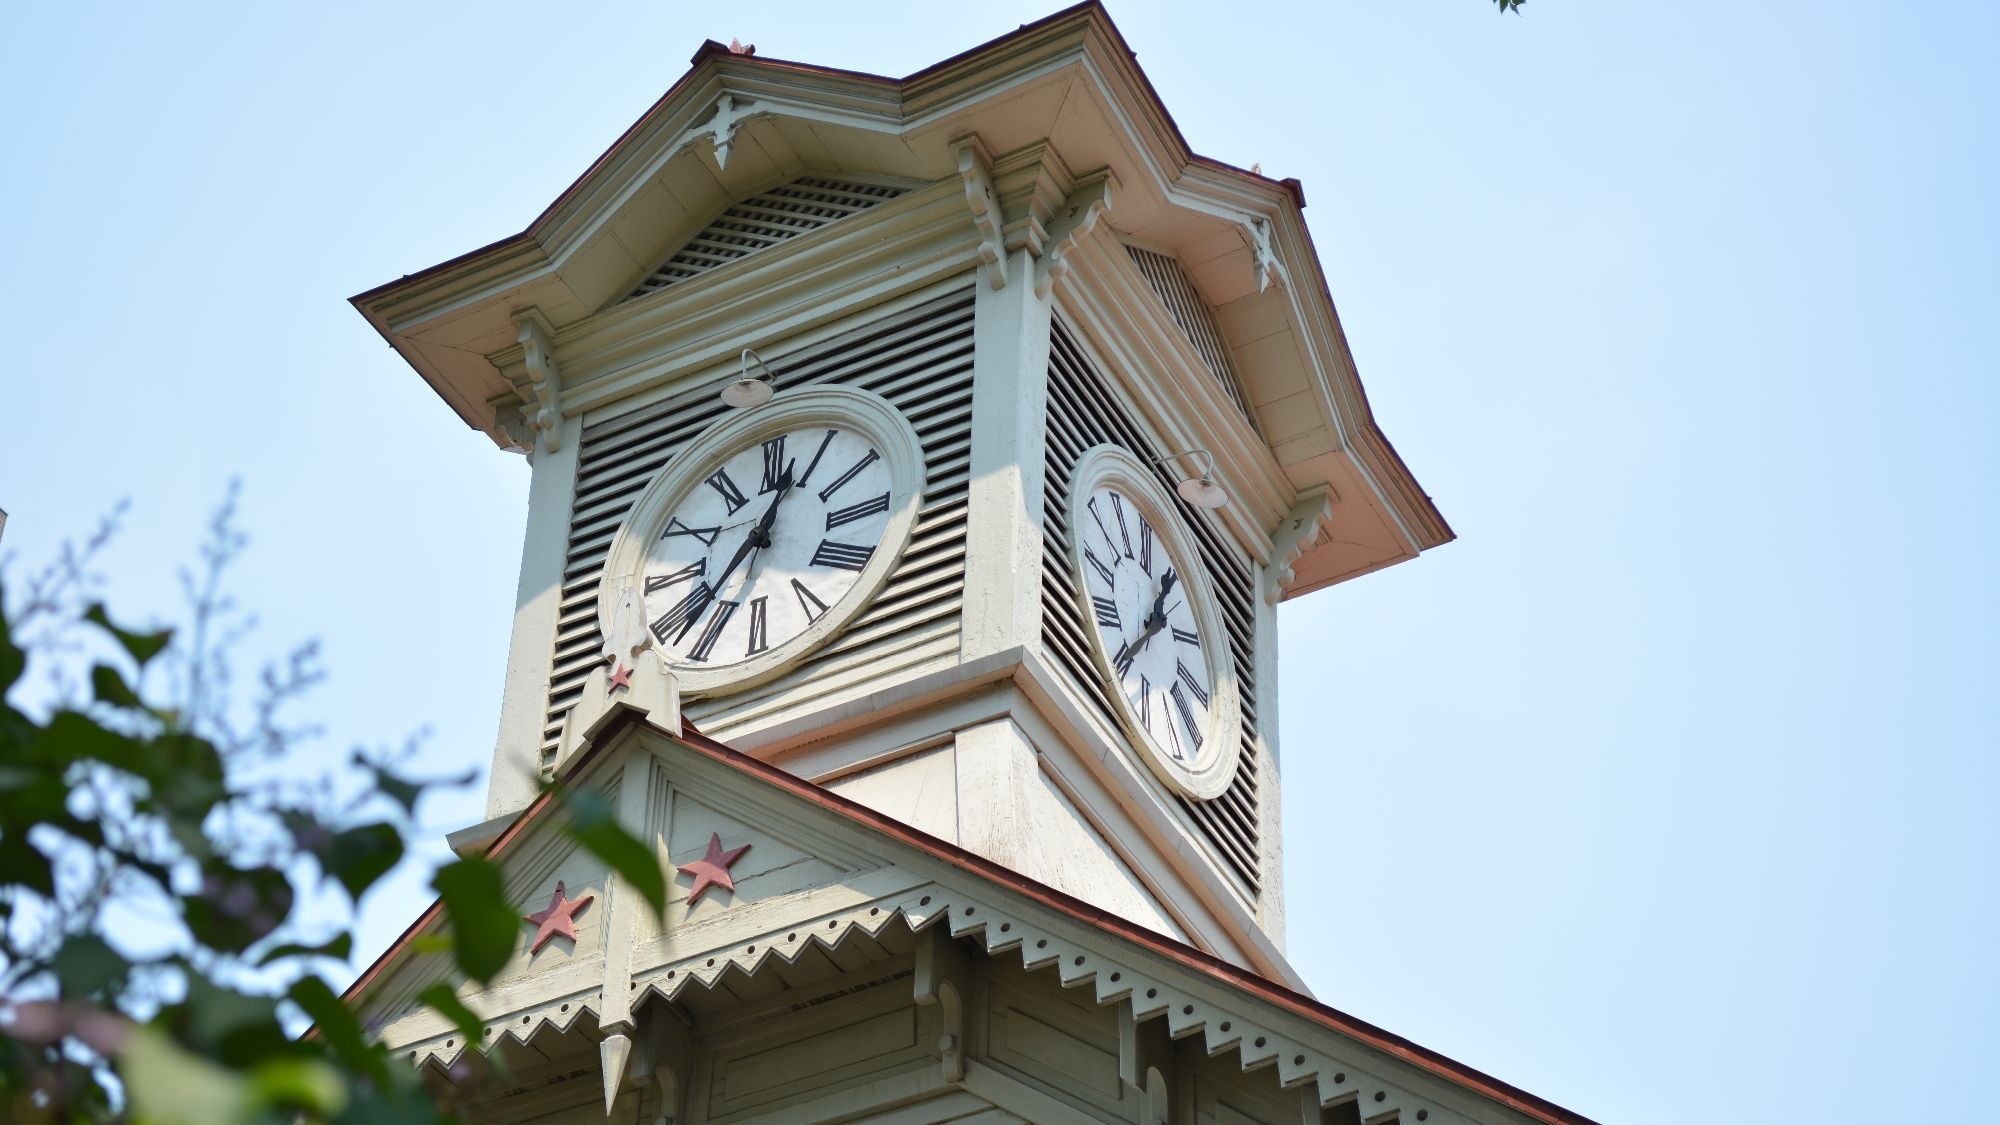 [Sightseeing around the area] Clock Tower / A historical building representing Sapporo that lets you hear the sound of a bell ringing every hour on the hour